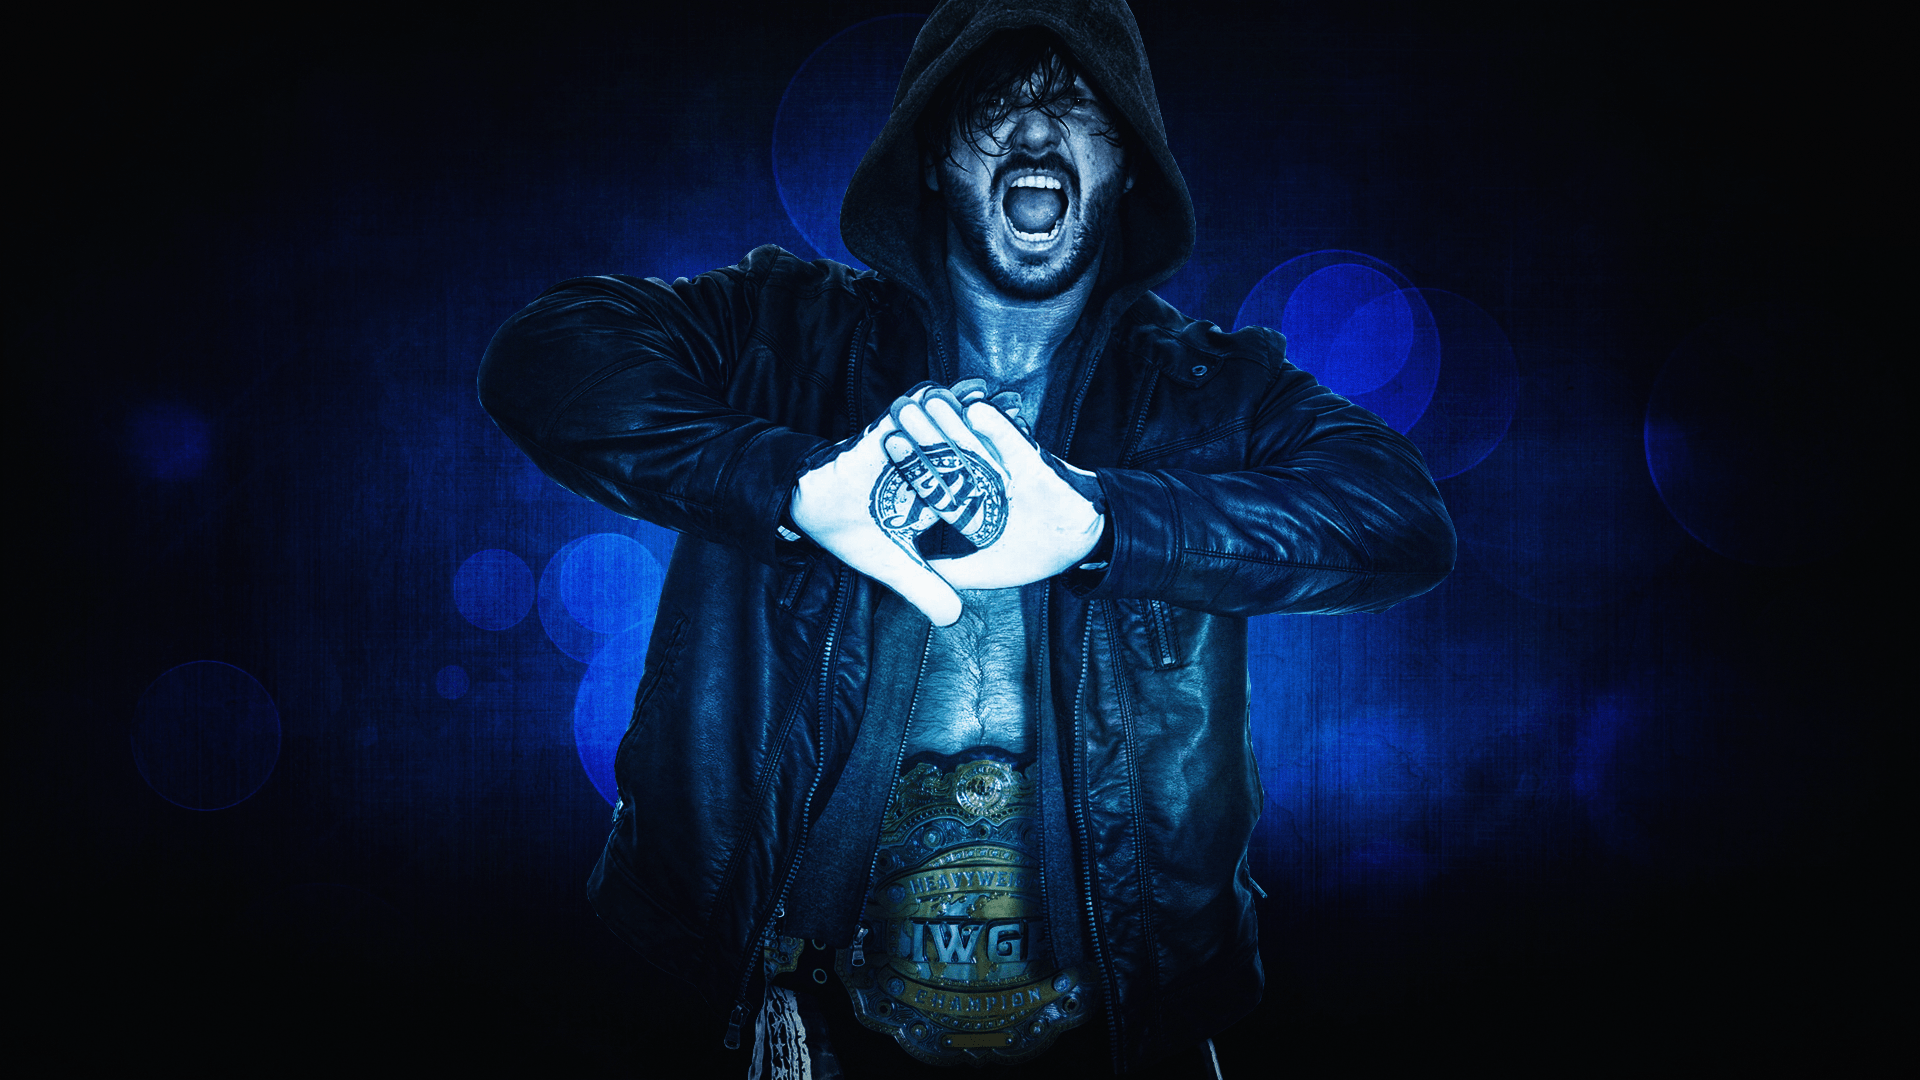 A.J. Styles Wallpapers - Wallpaper Cave